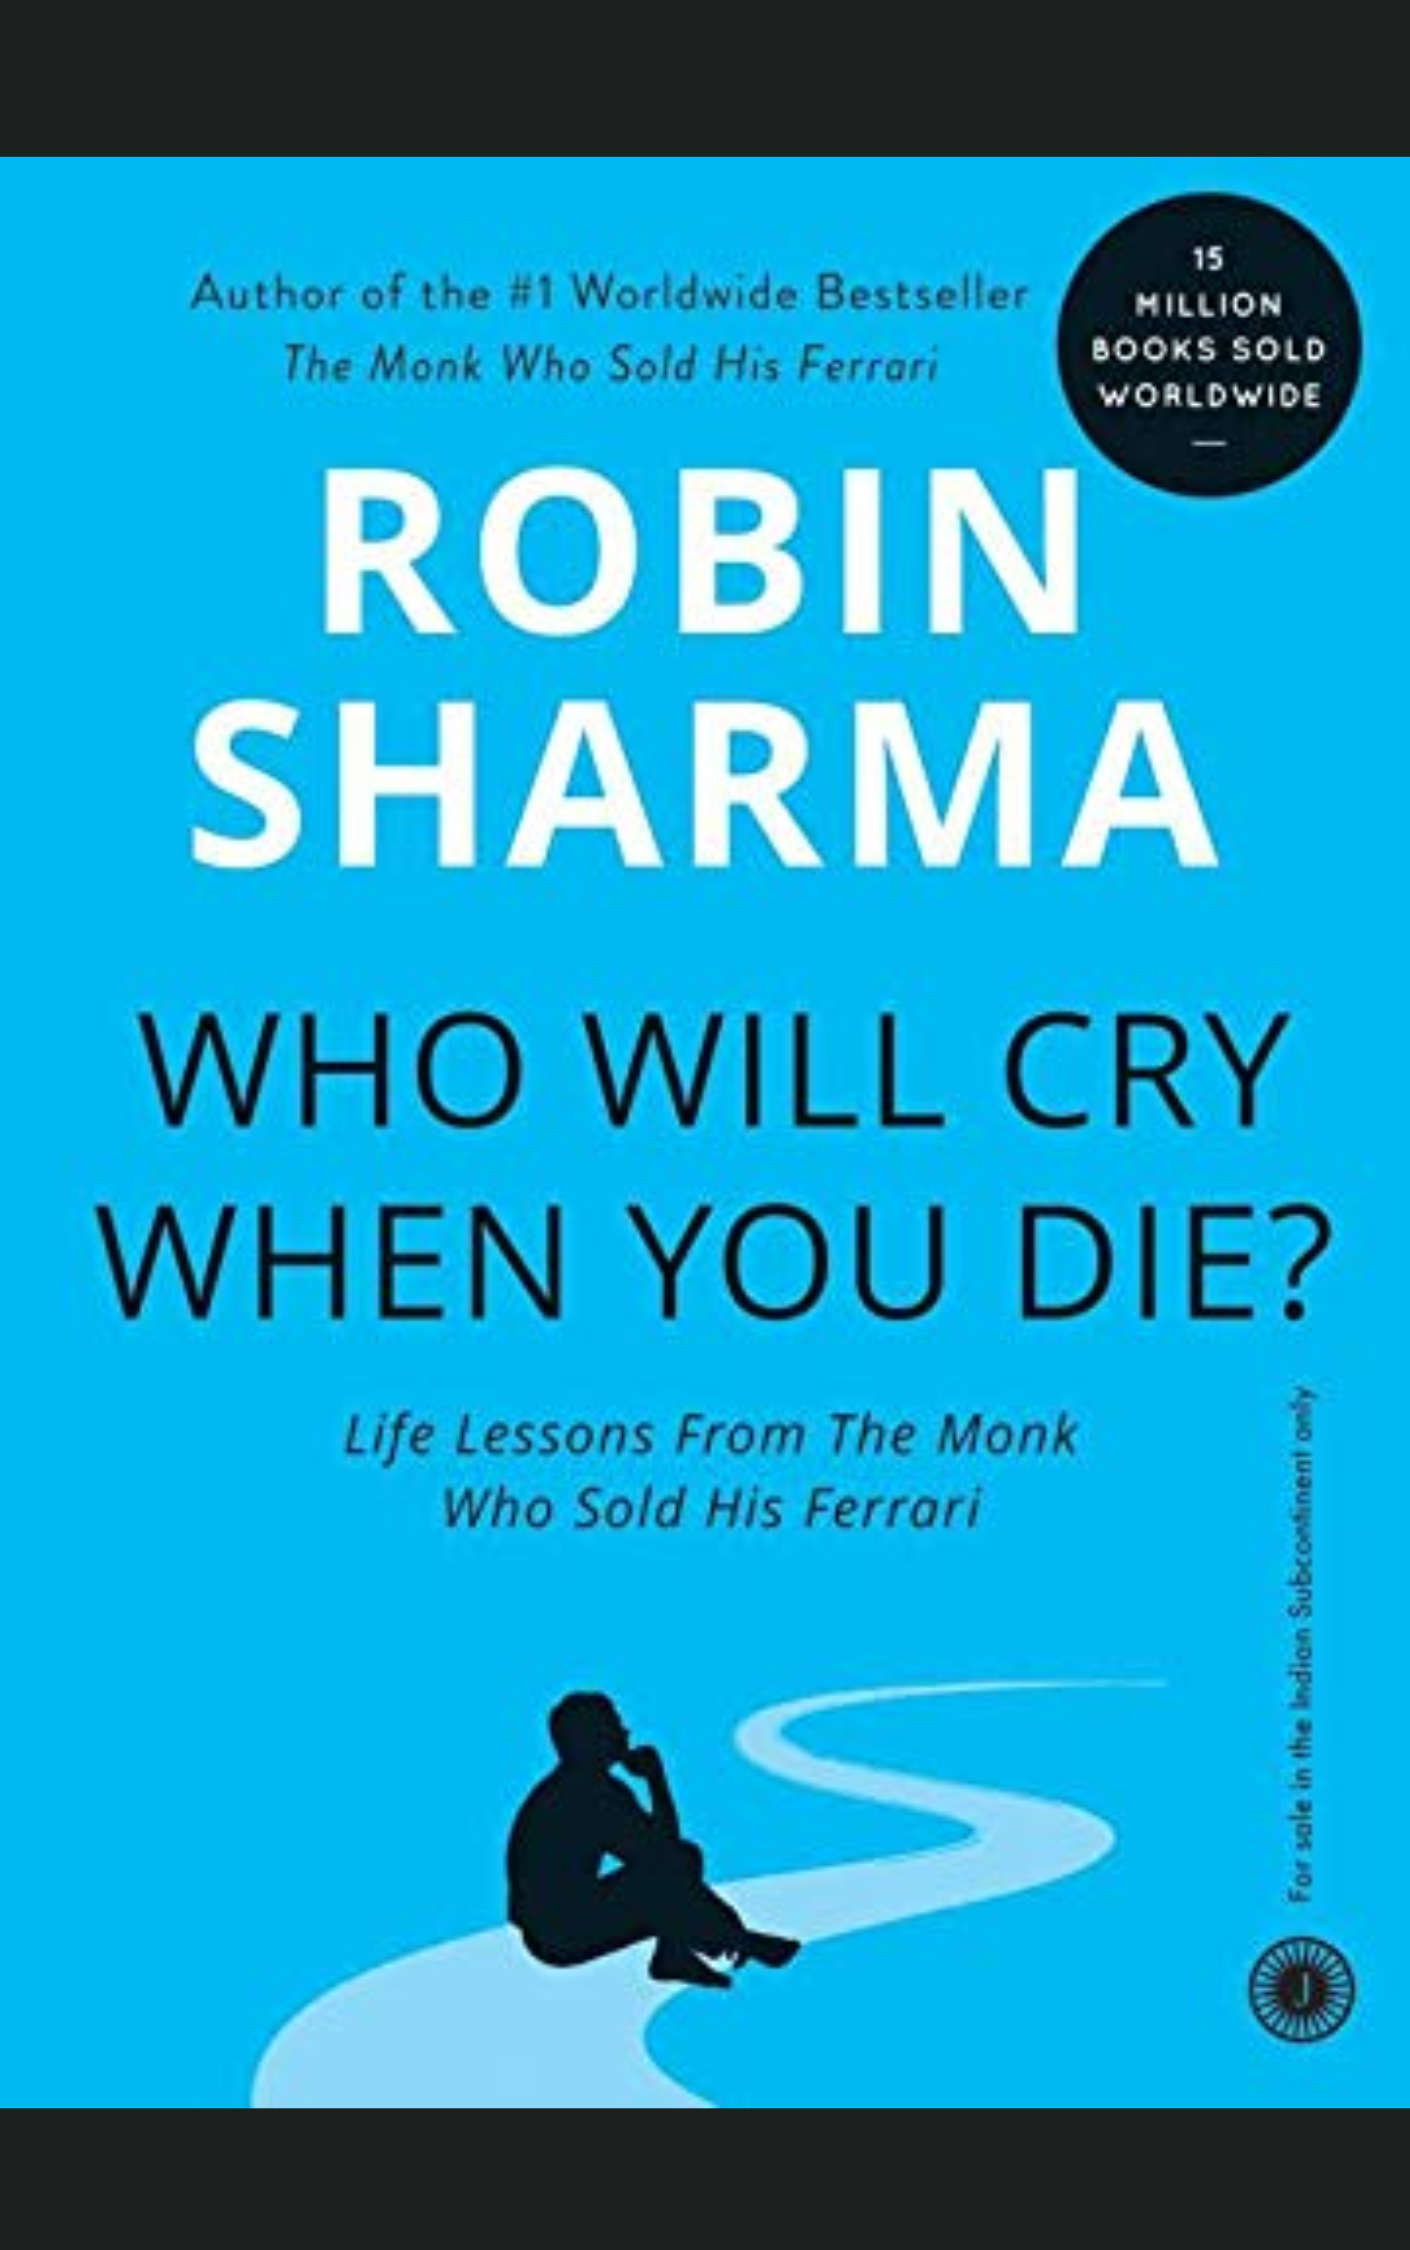 WHO WILL CRY WHEN YOU DIE by ROBIN SHARMA